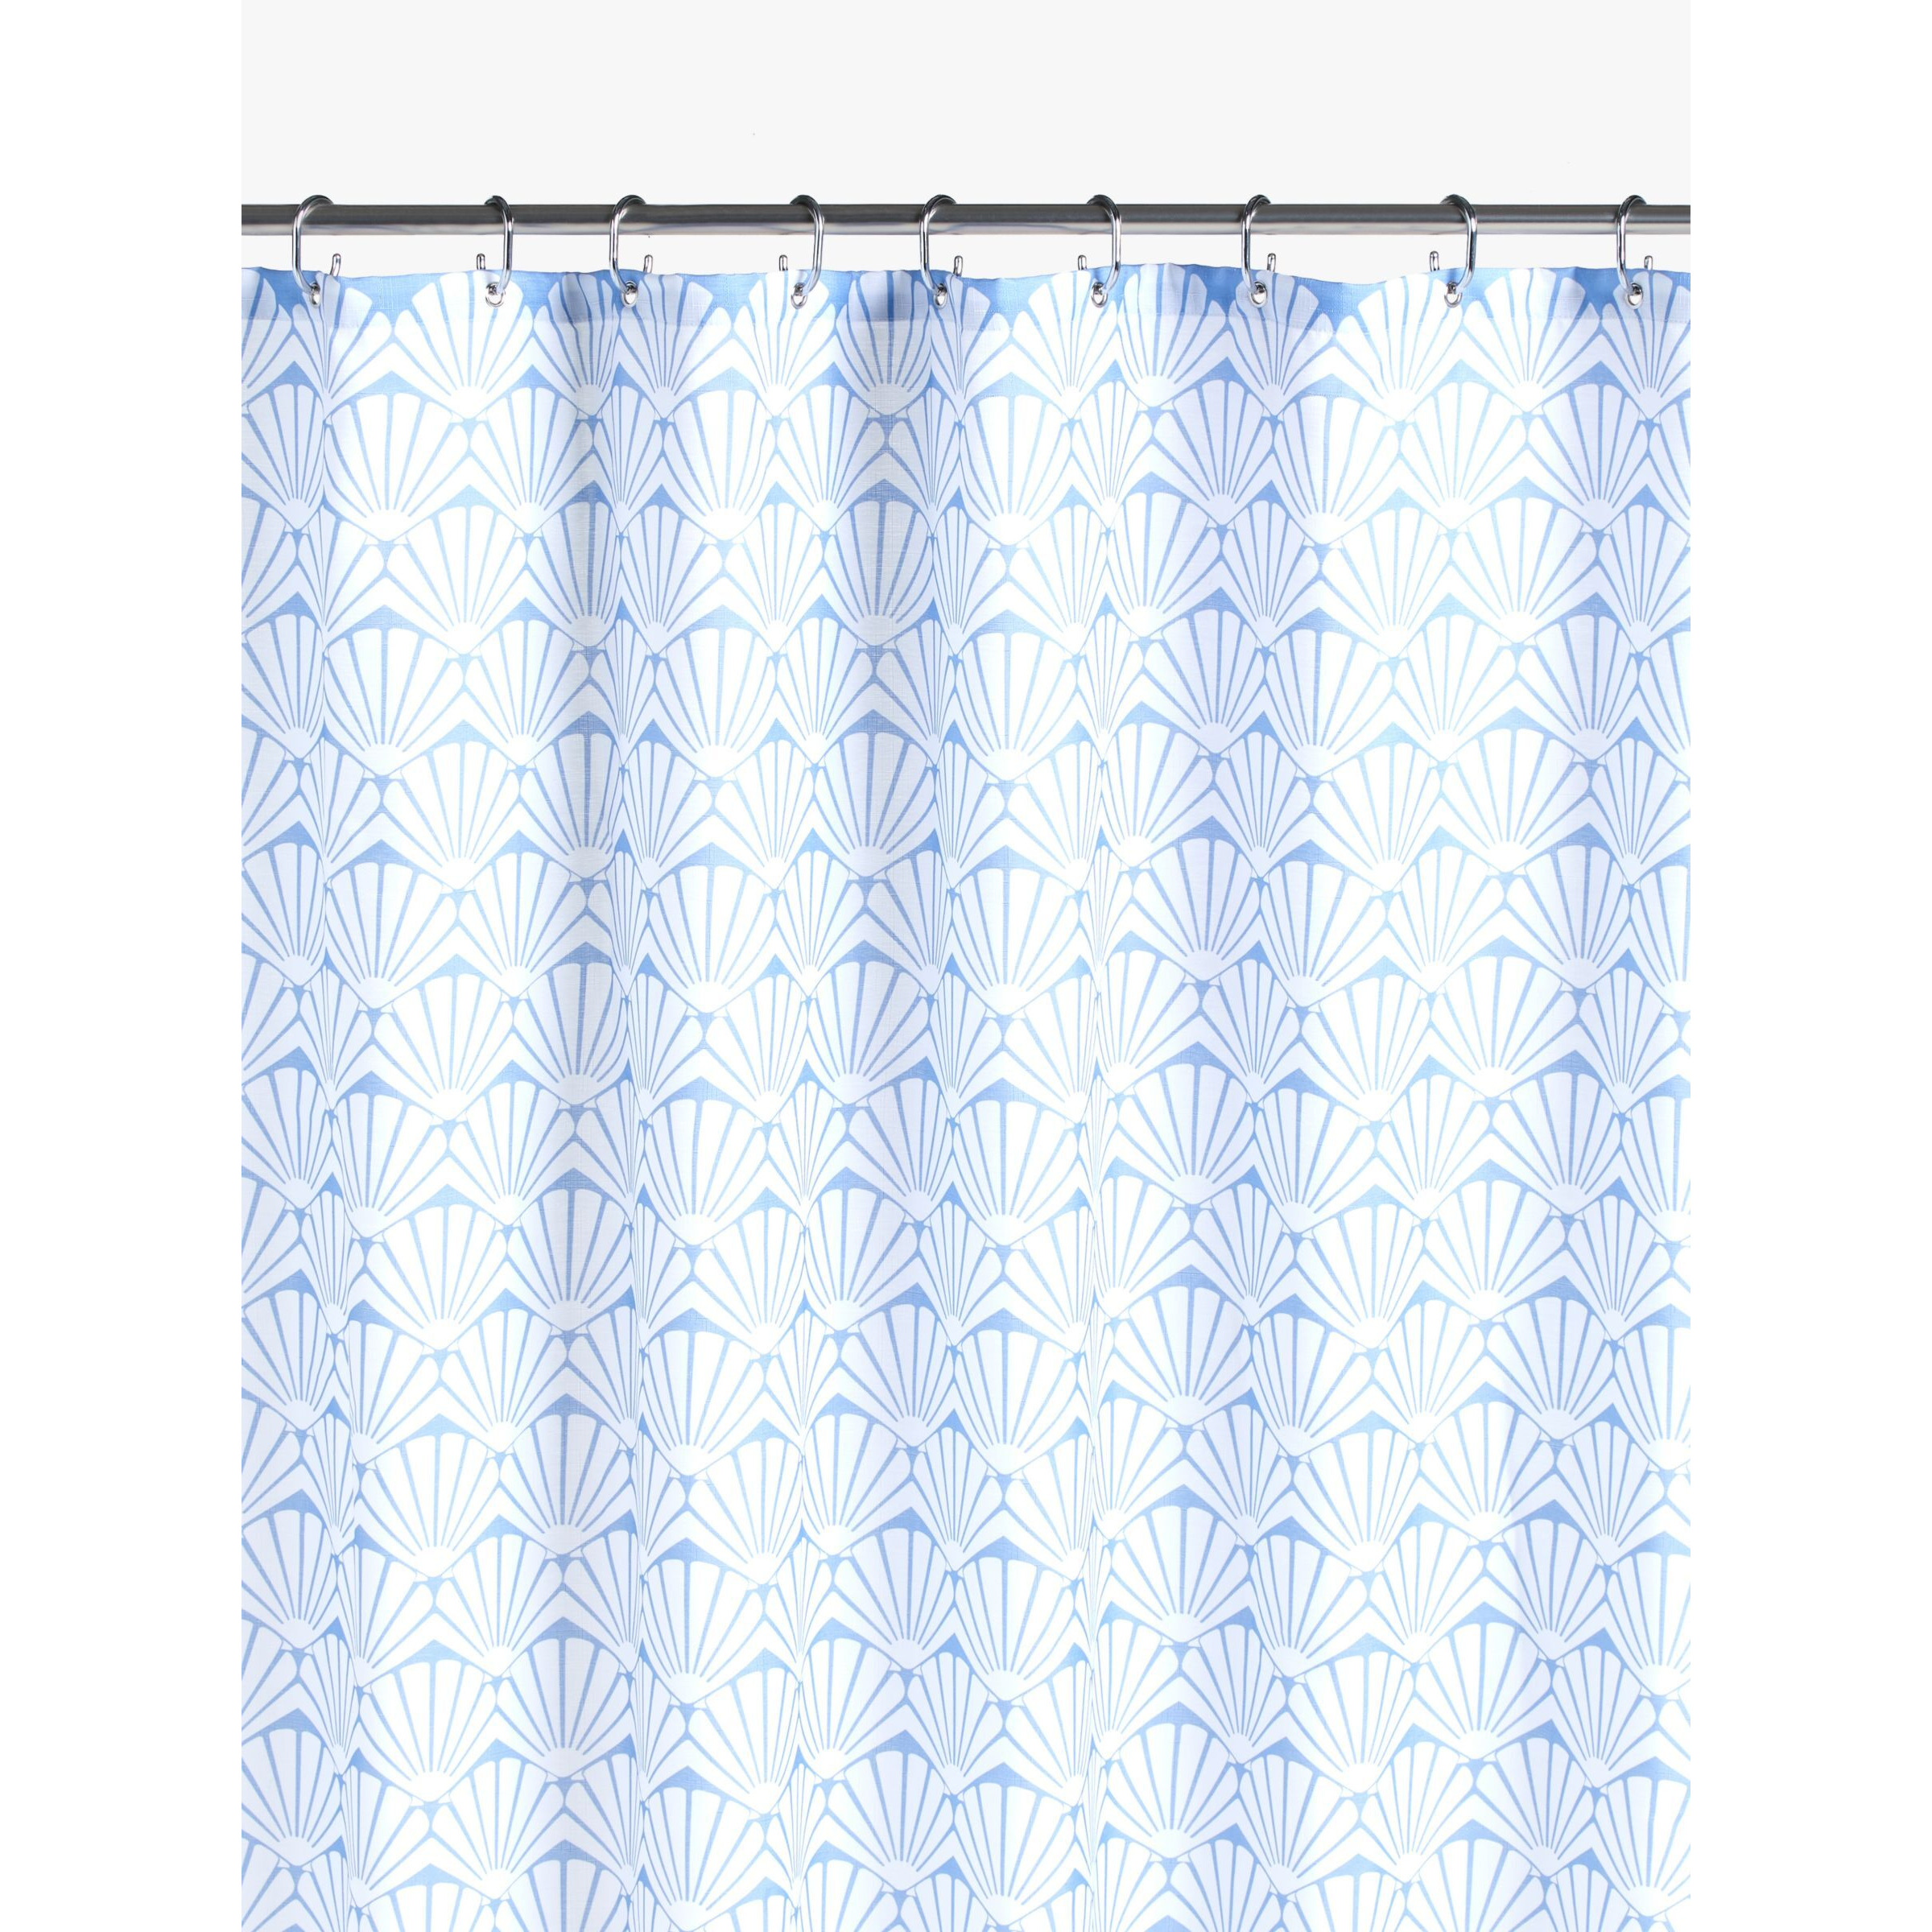 John Lewis Scallop Shell Recycled Polyester Shower Curtain - image 1